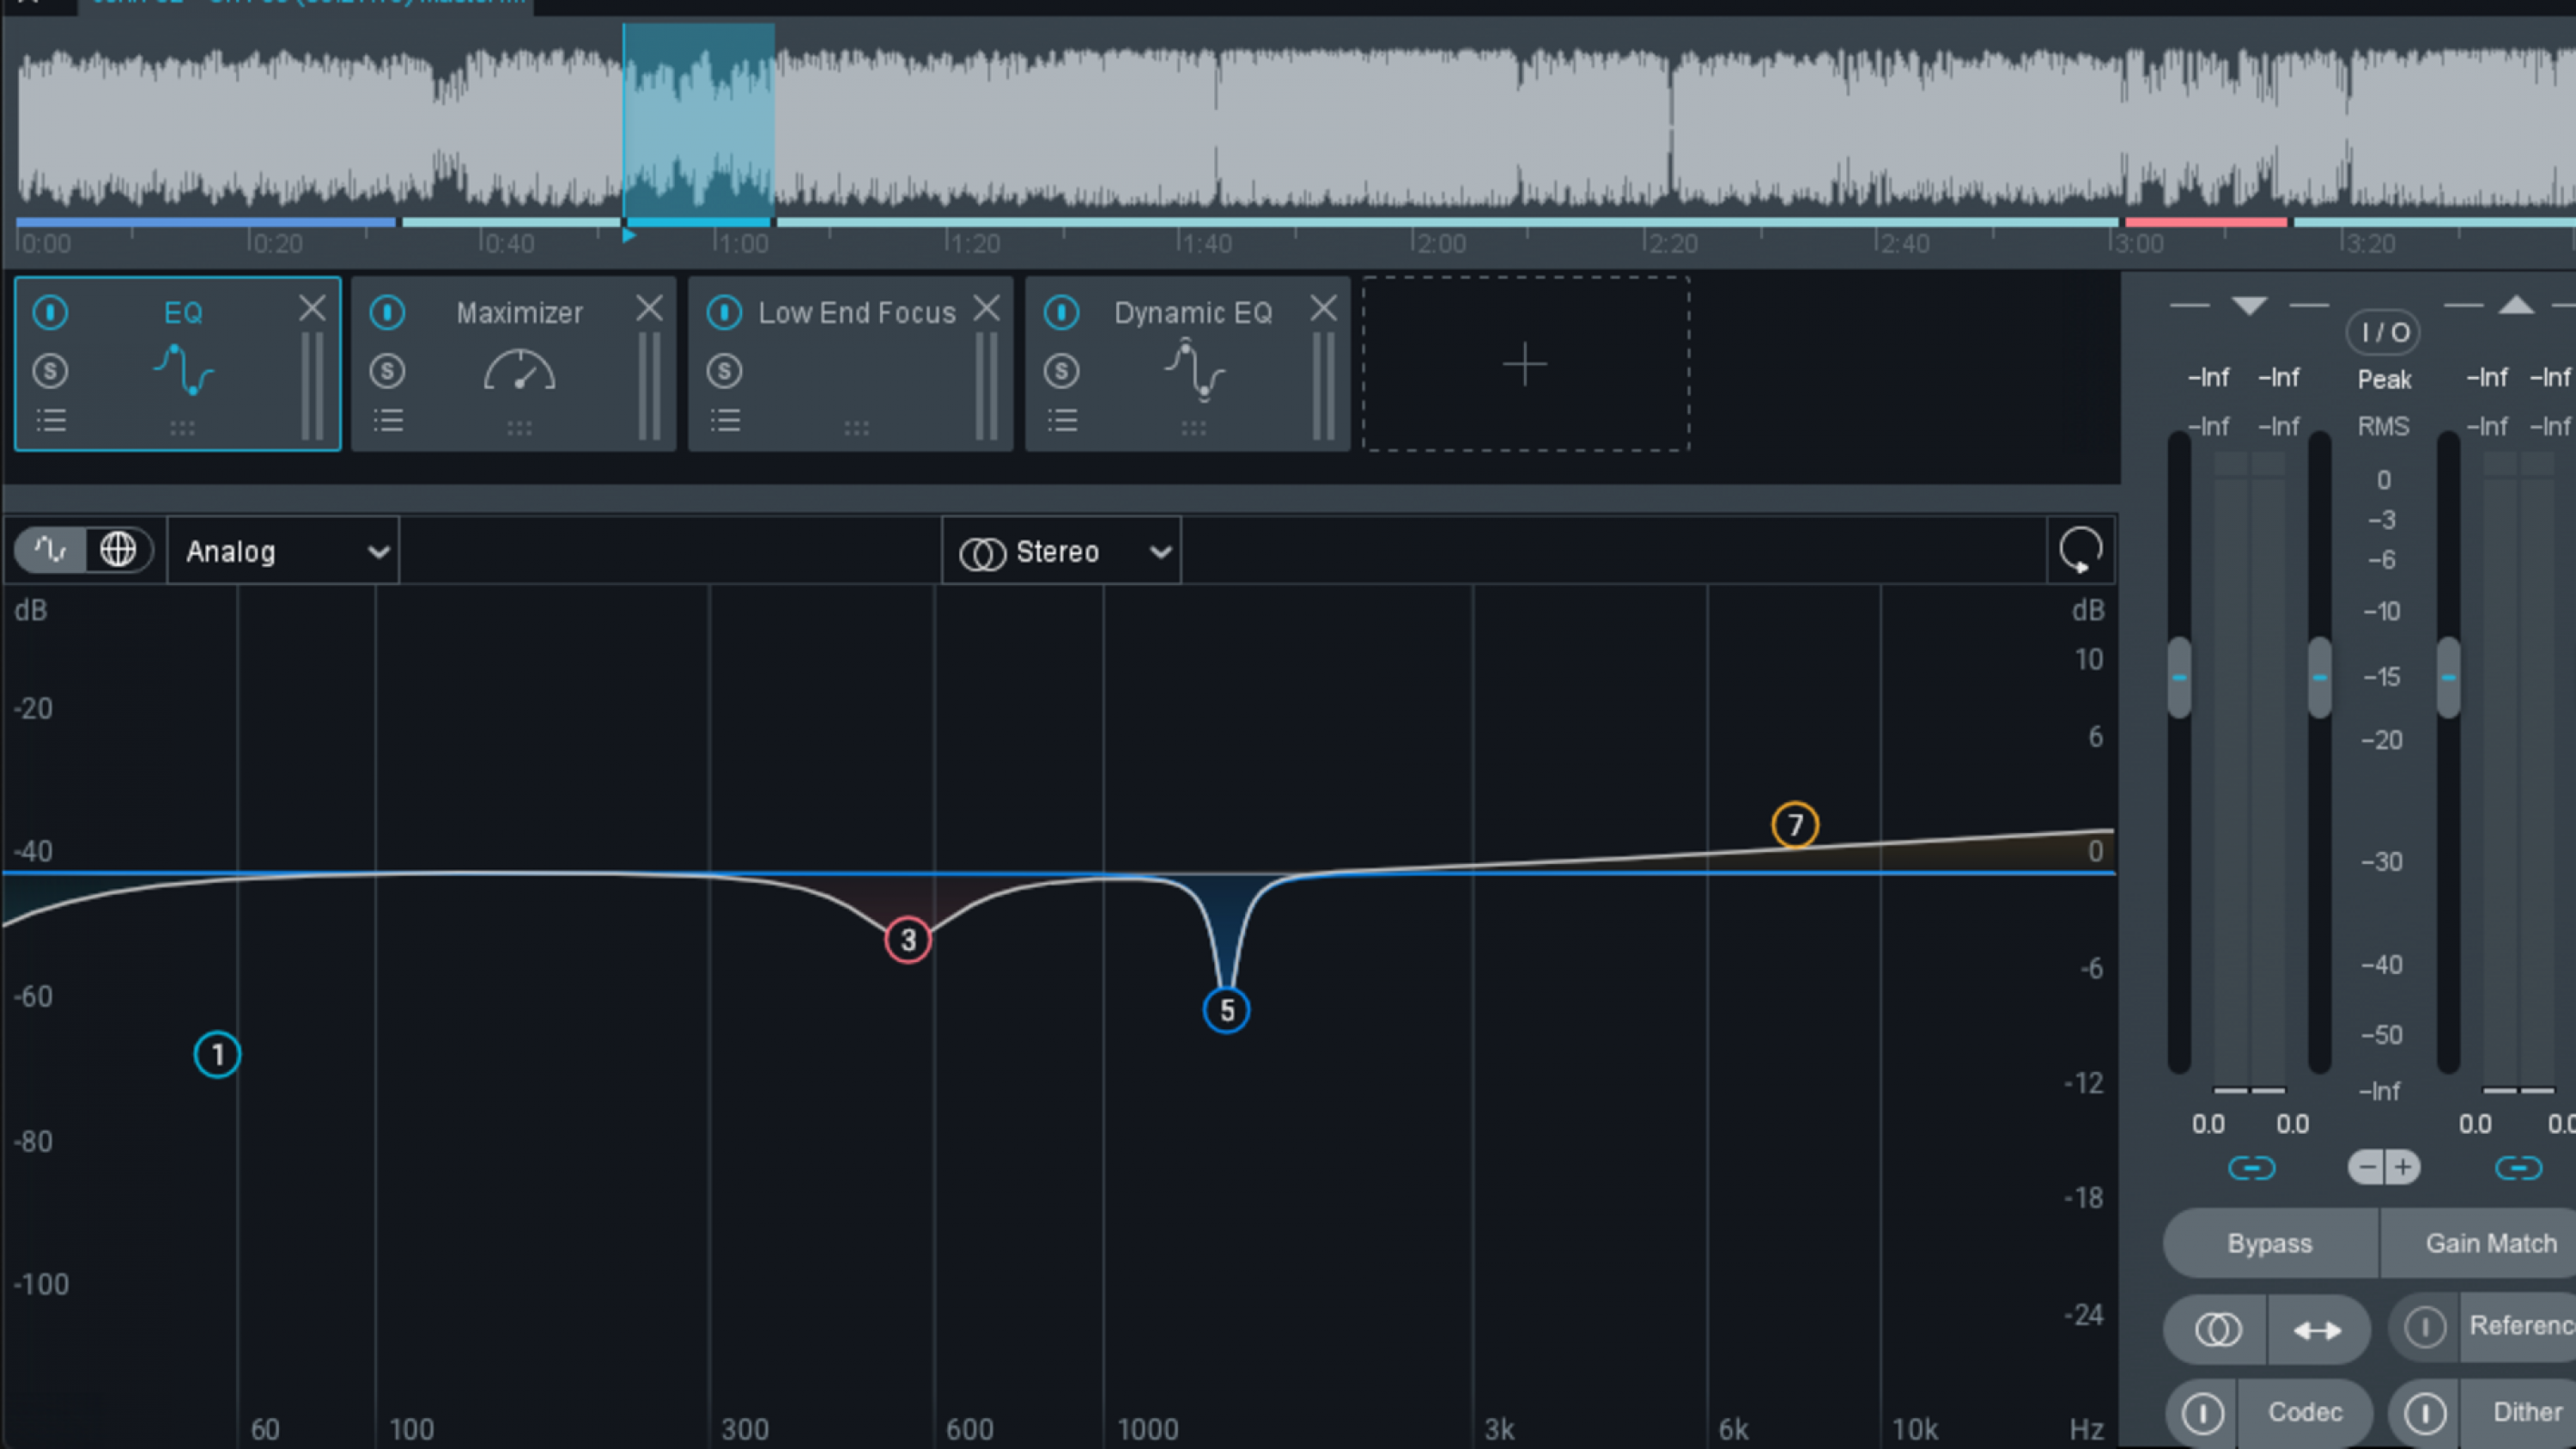 how to download izotope ozone 8 after purchase